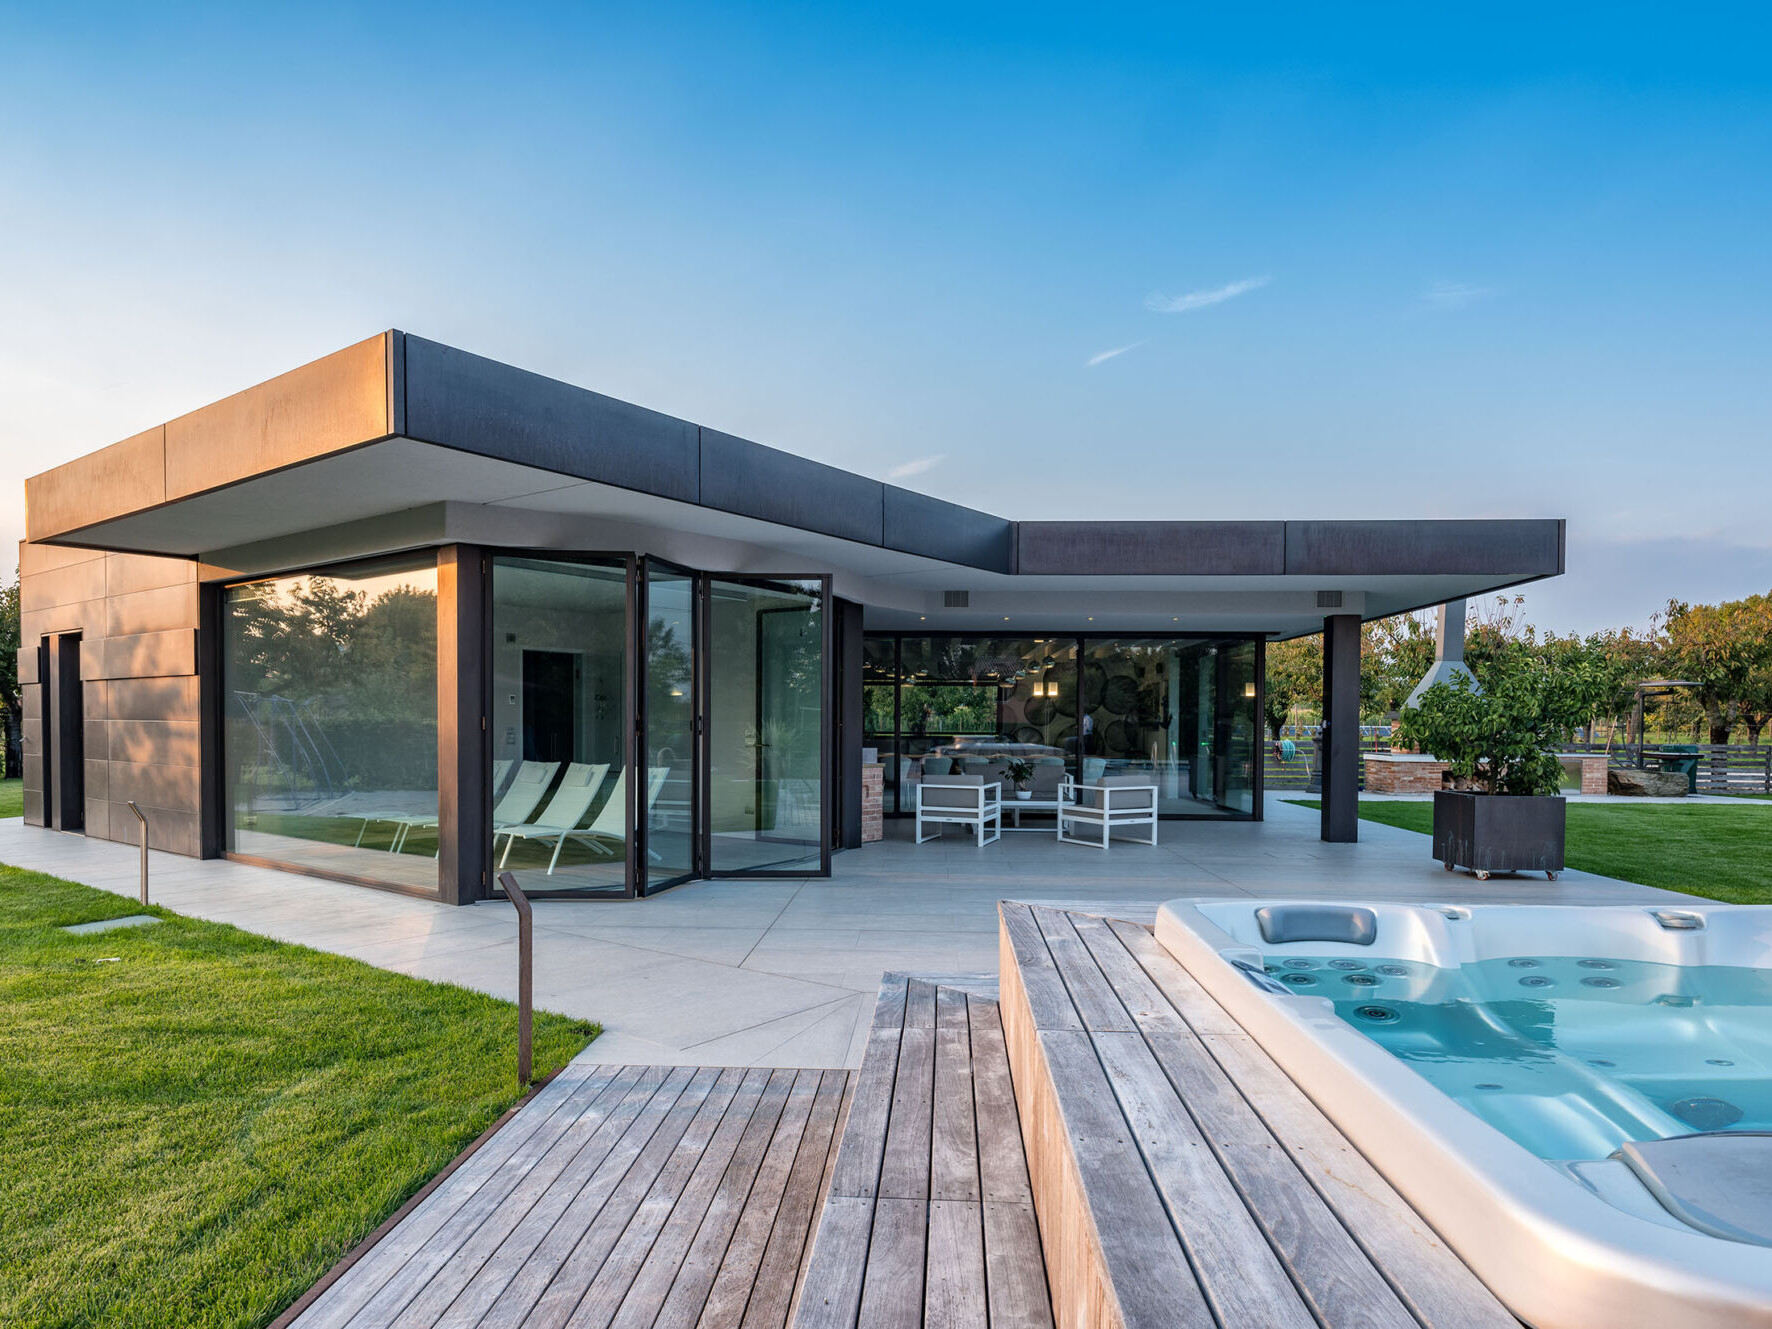 External view of the pool house with with motorized lift and slide doors and wide burnished brass fenestration